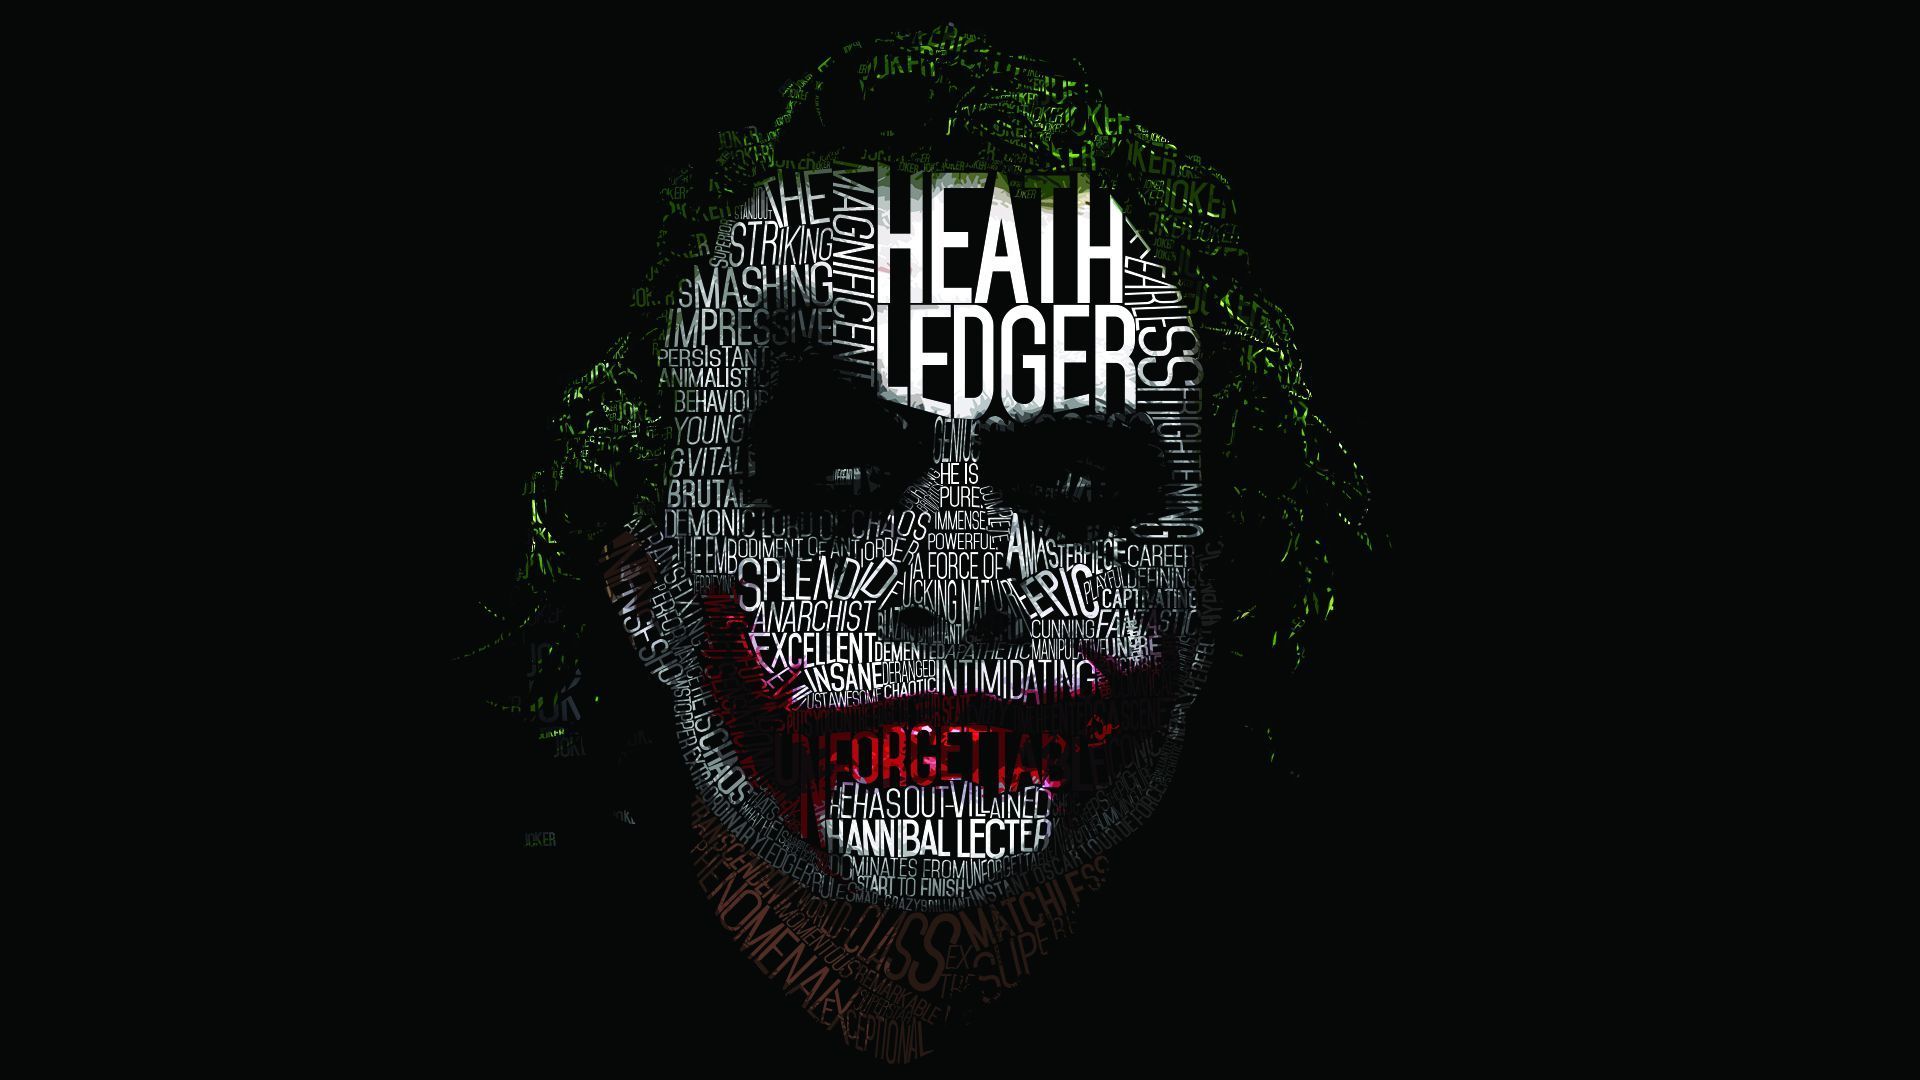 I made a typographic wallpaper to showoff the feedback that Heath